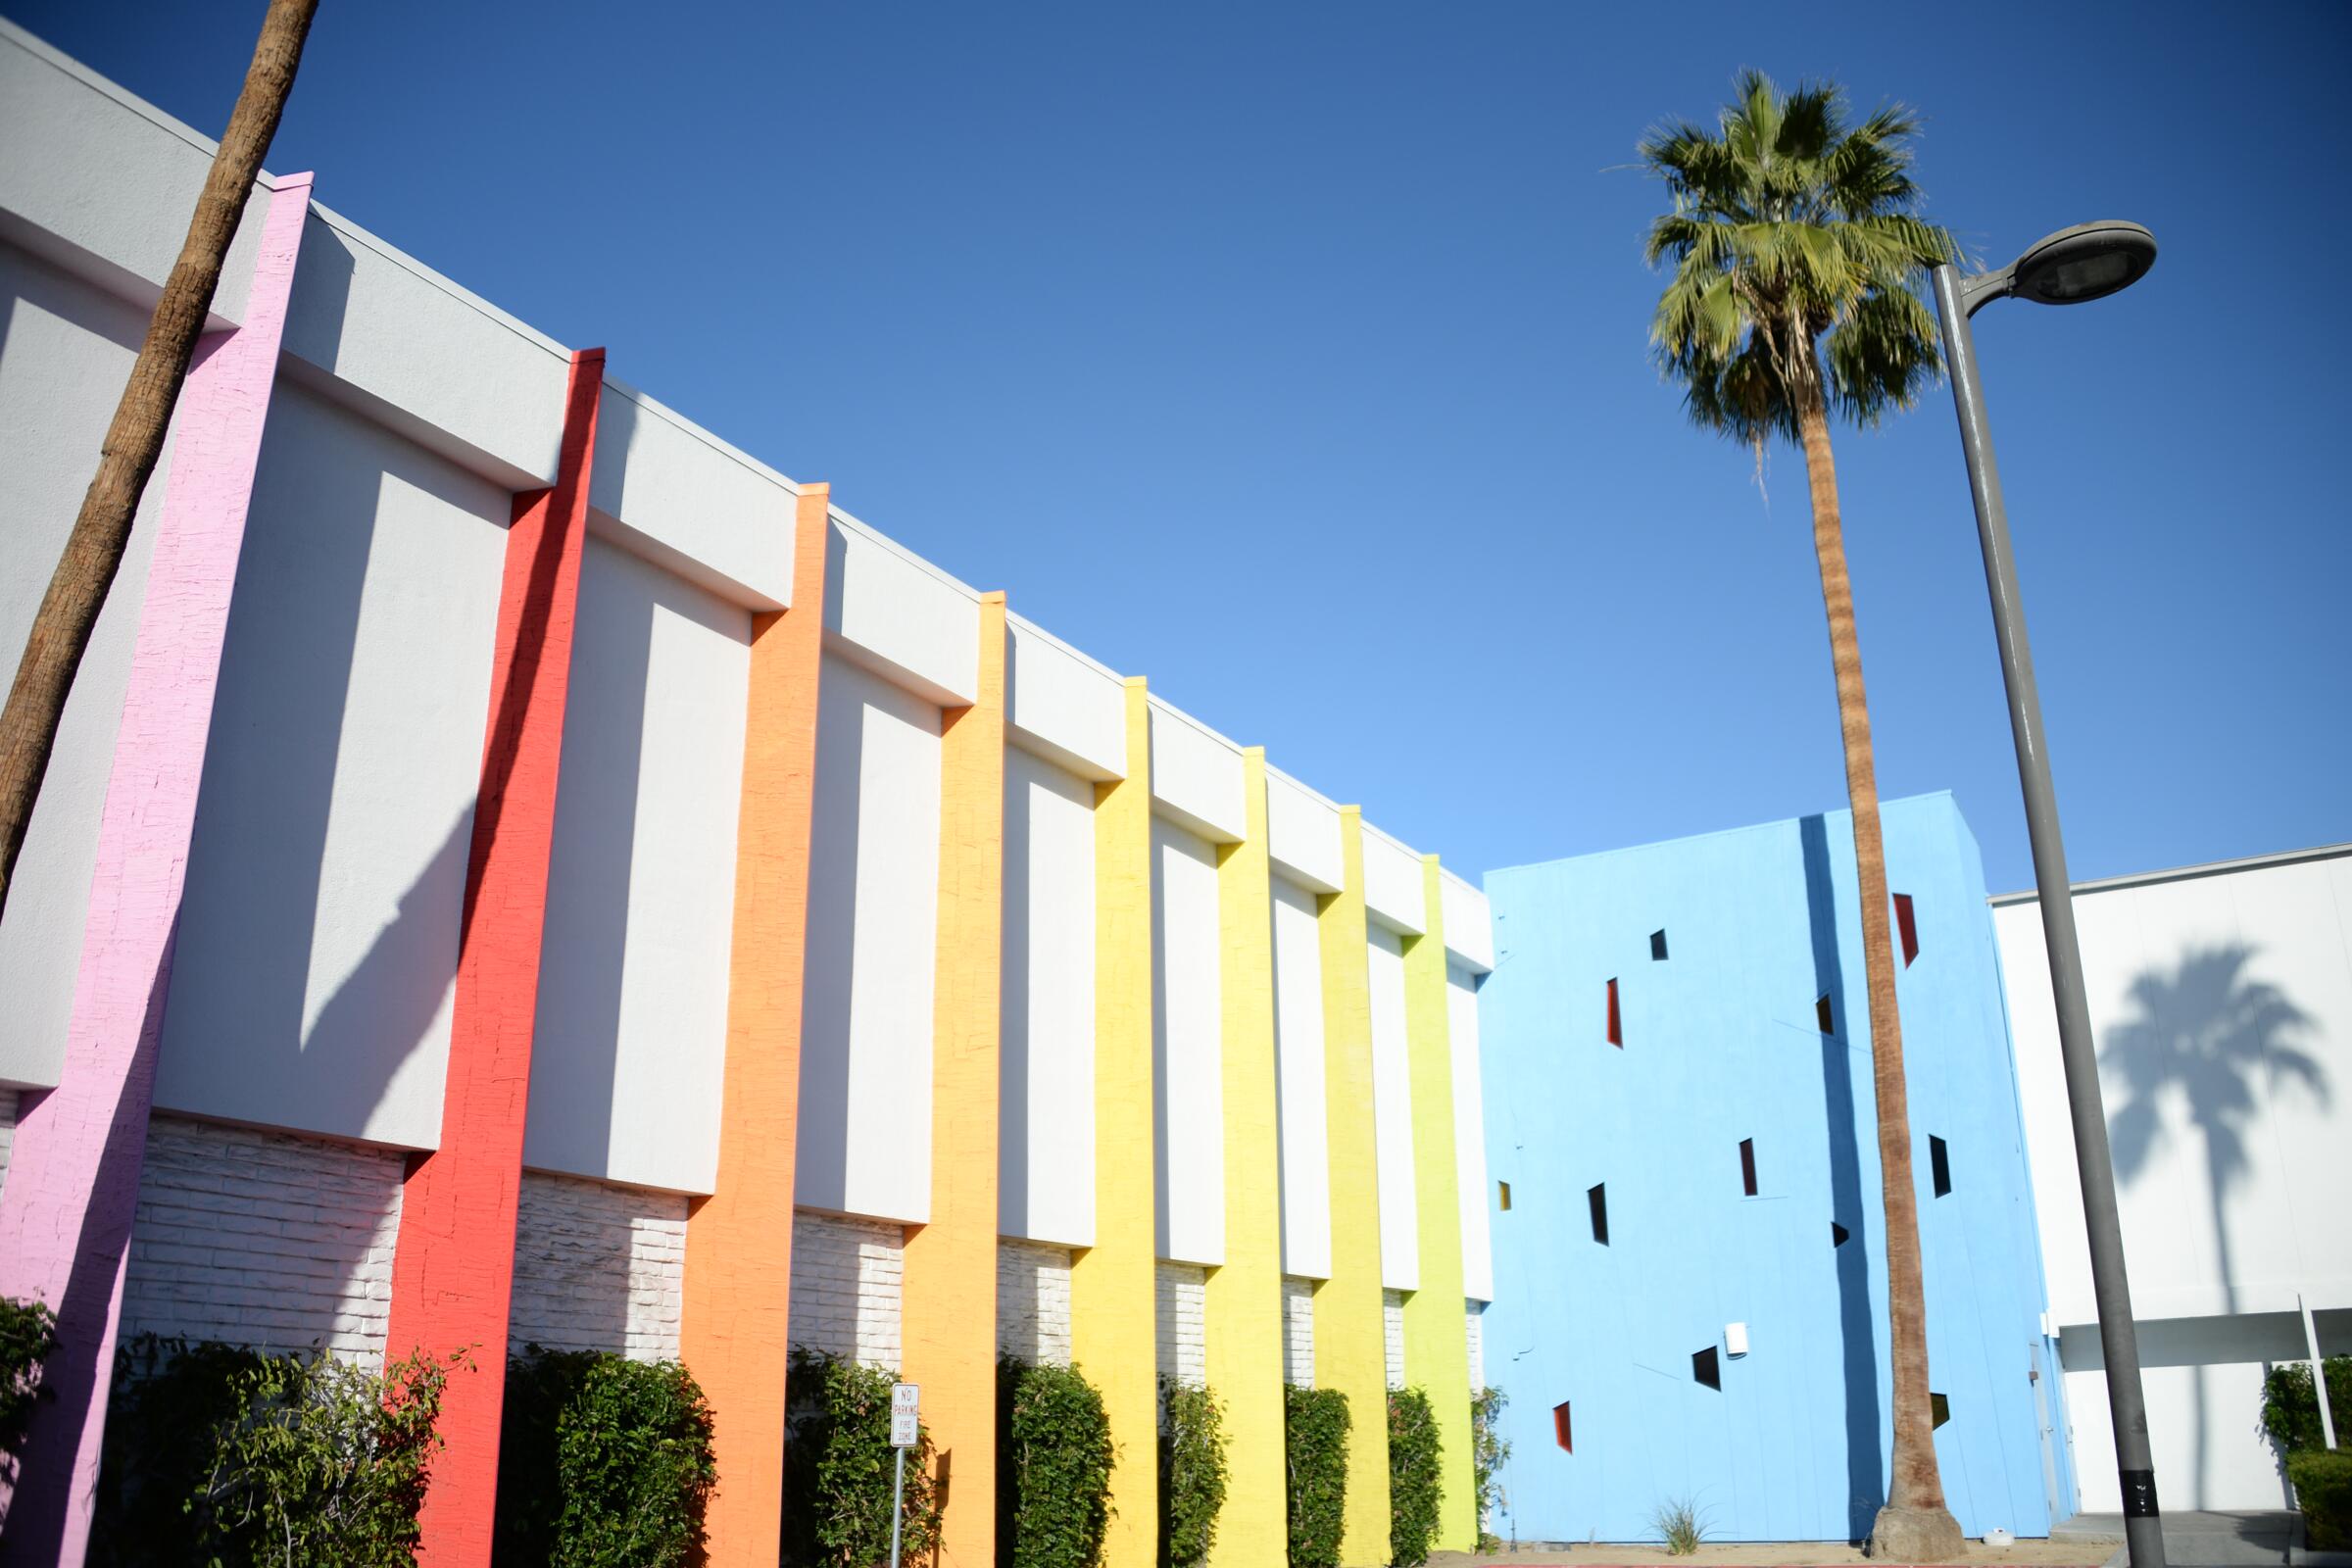 An exterior shot of The Saguaro Hotel, one of the (aesthetic) pit stops on my road trip to Indio.